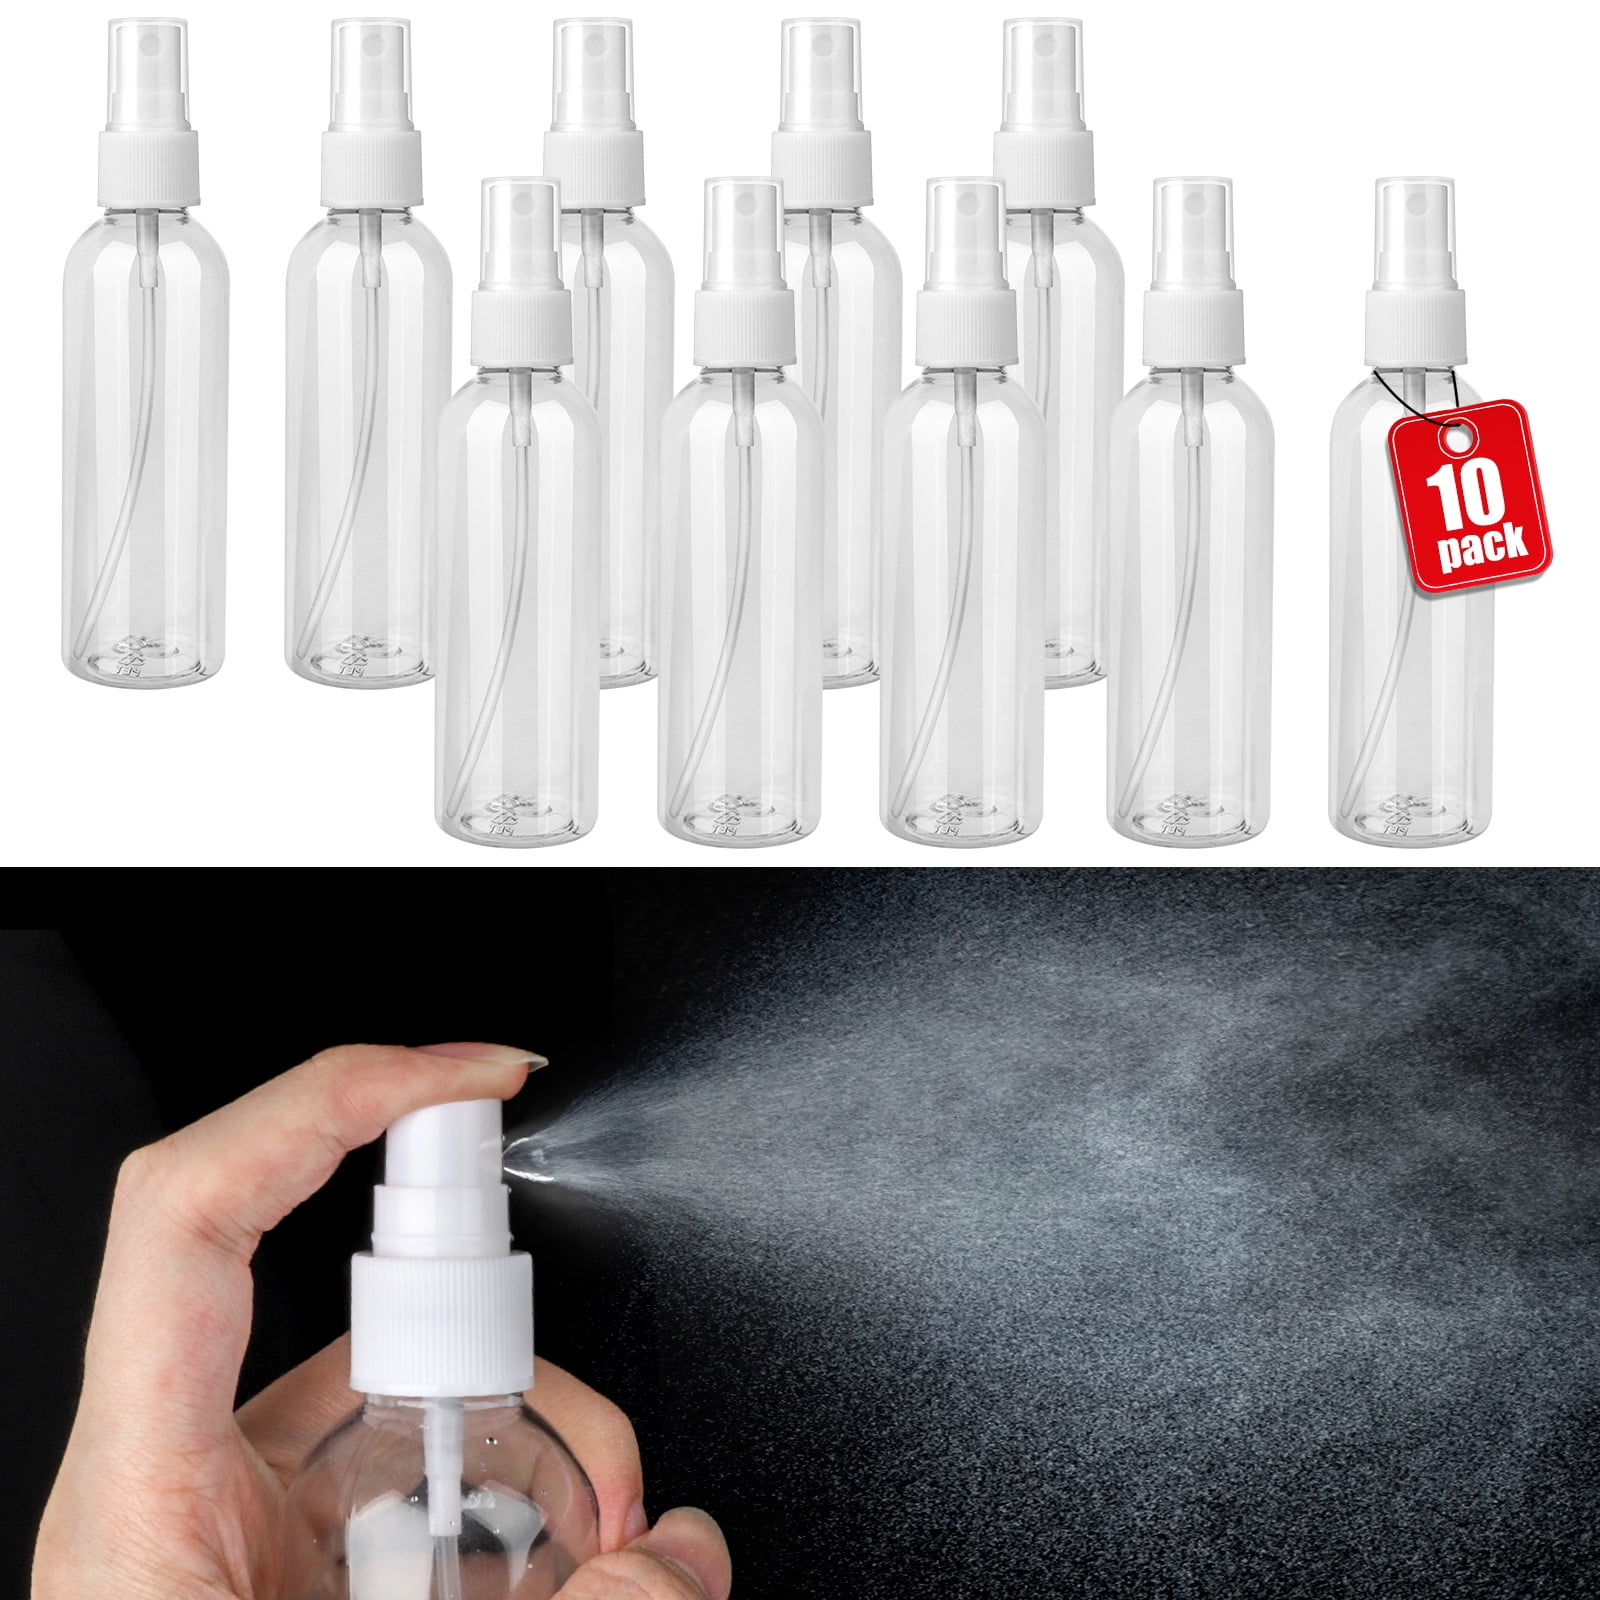 Some (But Not All) Spray Bottles are Designed • Everyday Cheapskate